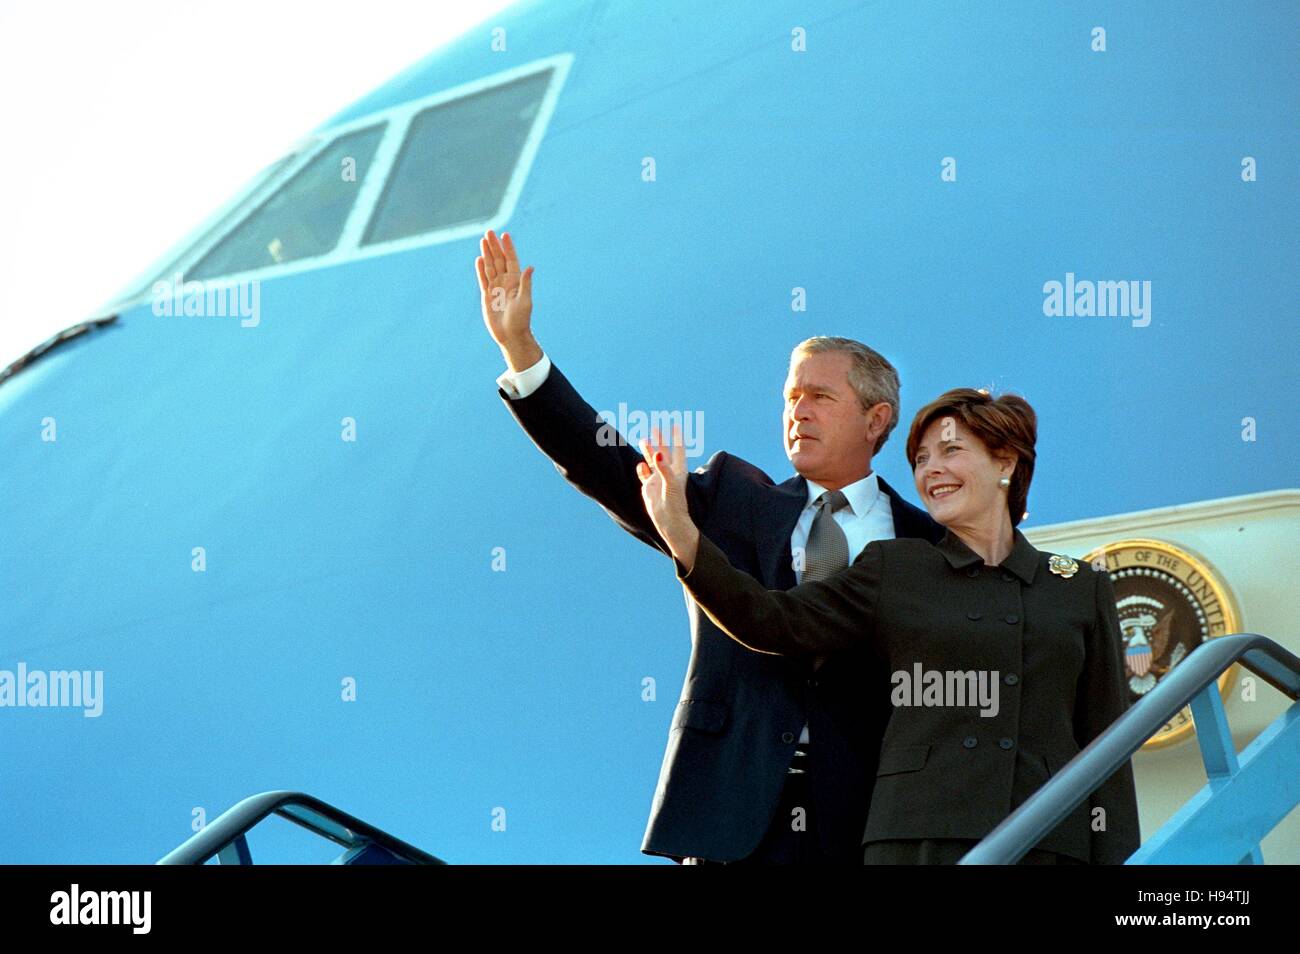 U.S. President George W. Bush and First Lady Laura Bush wave before boarding Air Force One at the Barajas International Airport June 13, 2001 in Madrid, Spain. Stock Photo